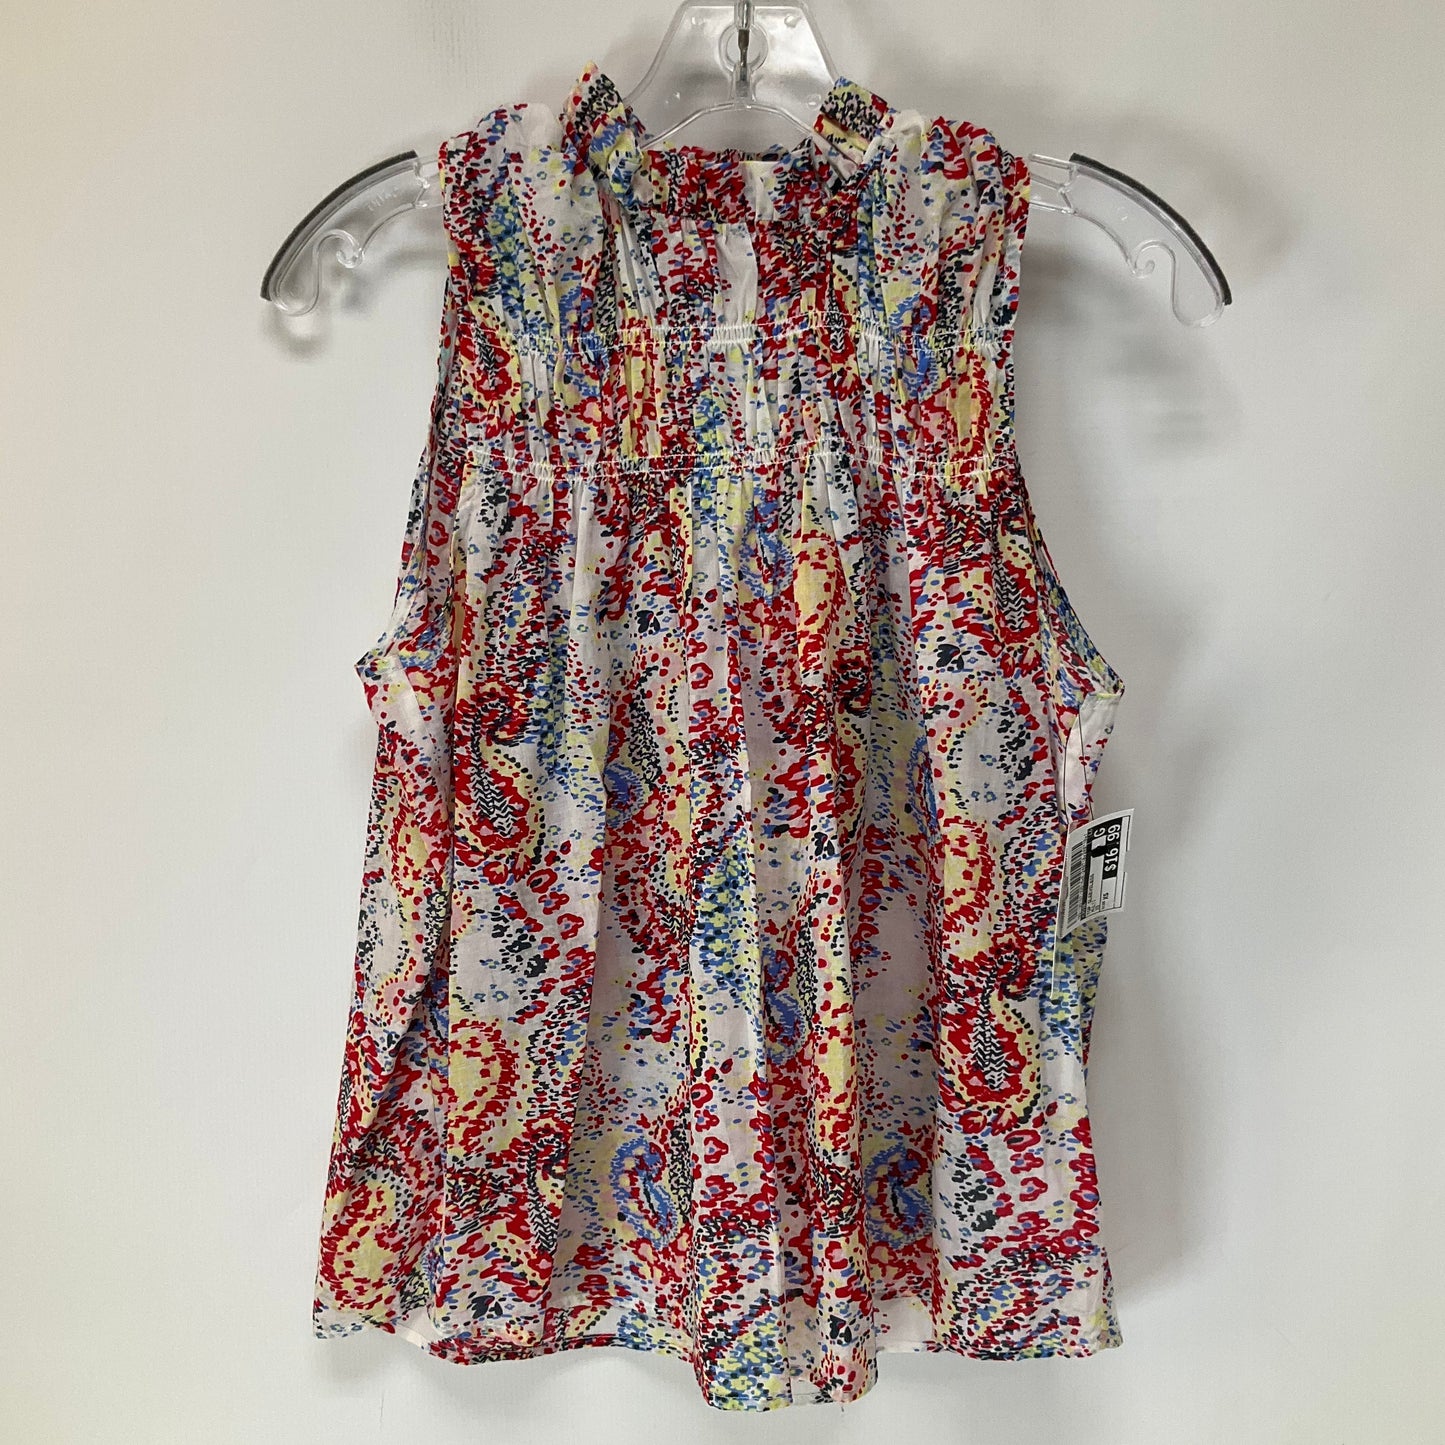 Multi-colored Top Sleeveless Joie, Size Xs